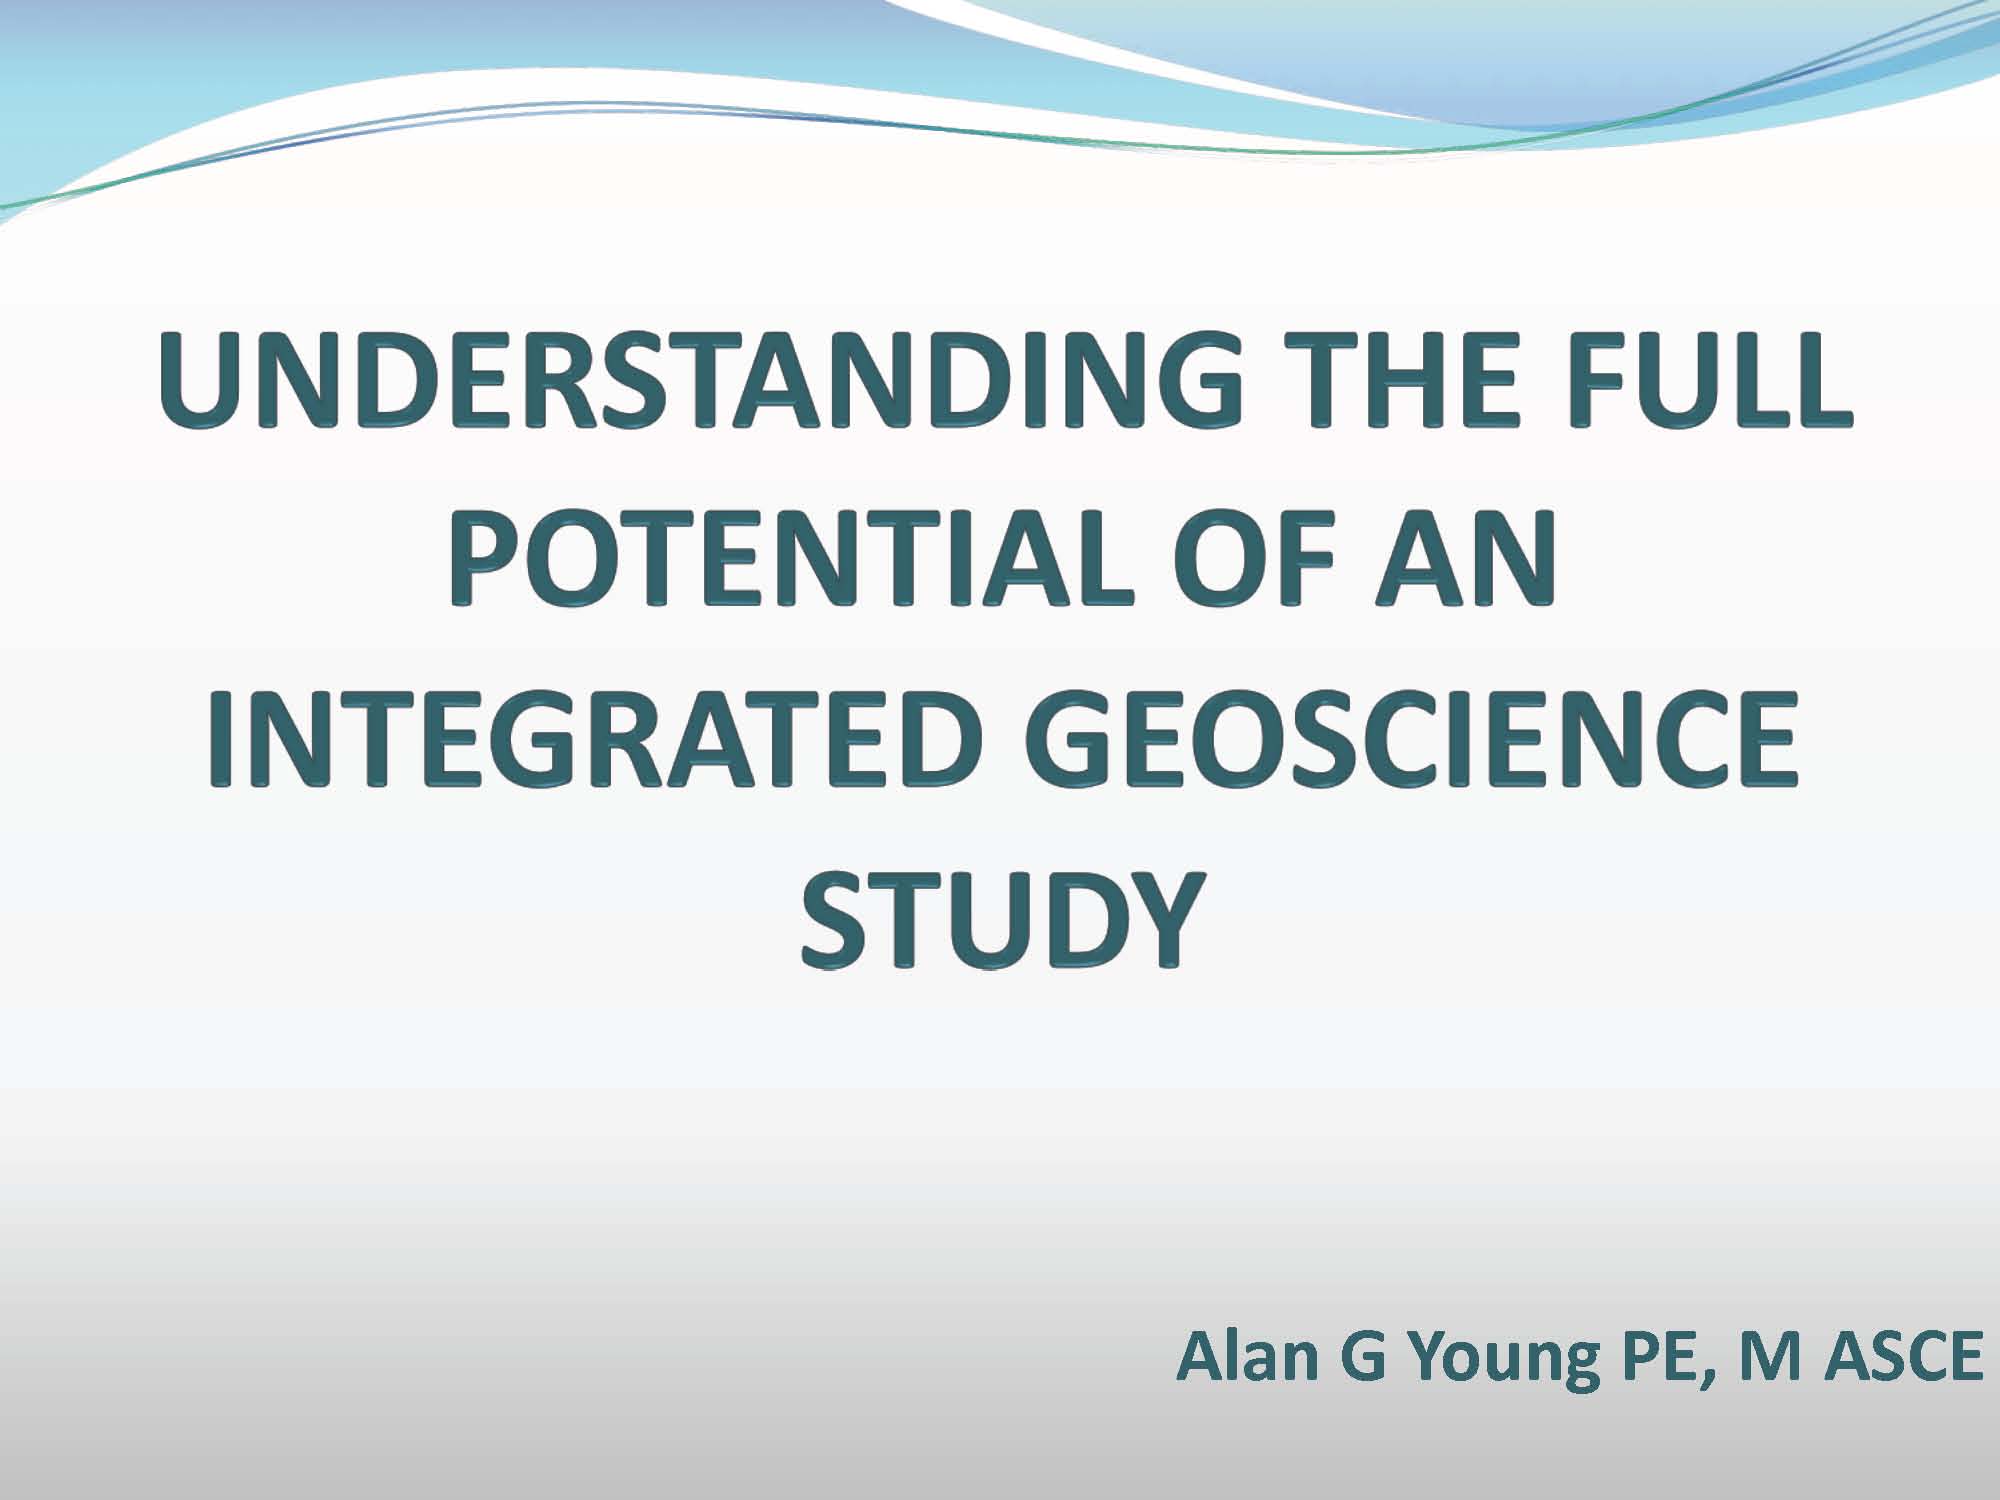 Understanding the Full Potential of An Integrated Geoscience Study (Fourth ISSMGE McClelland Lecture) {"category":"honour_lecture","subjects":["Offshore Geotechnics"],"number":"HML104","instructors":["Alan G. Young"]}